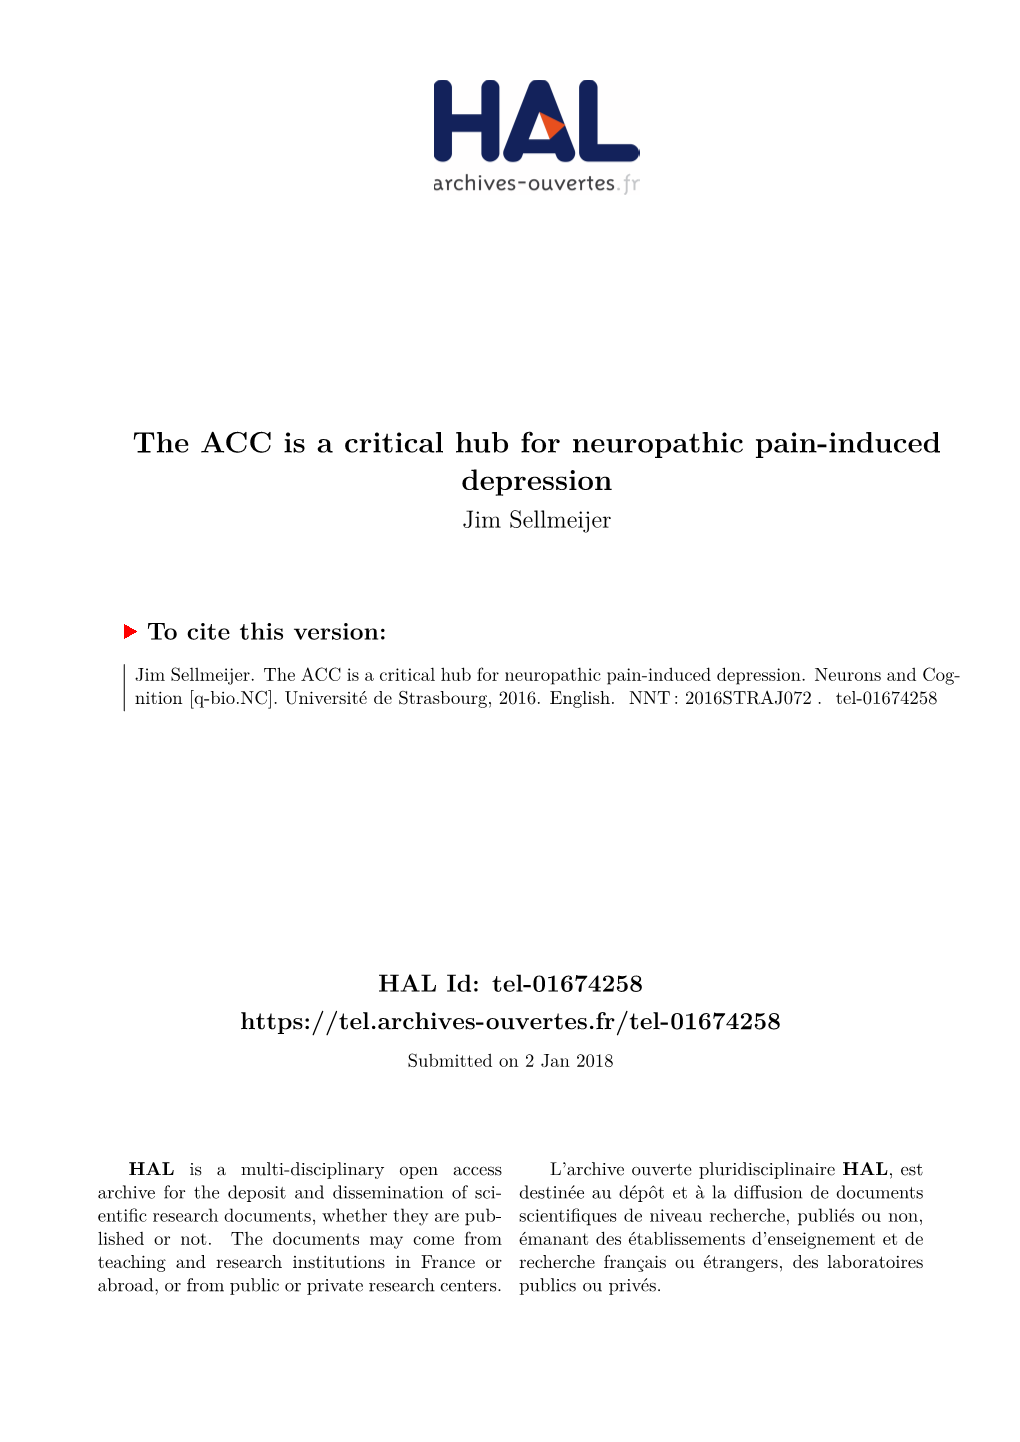 The ACC Is a Critical Hub for Neuropathic Pain-Induced Depression Jim Sellmeijer